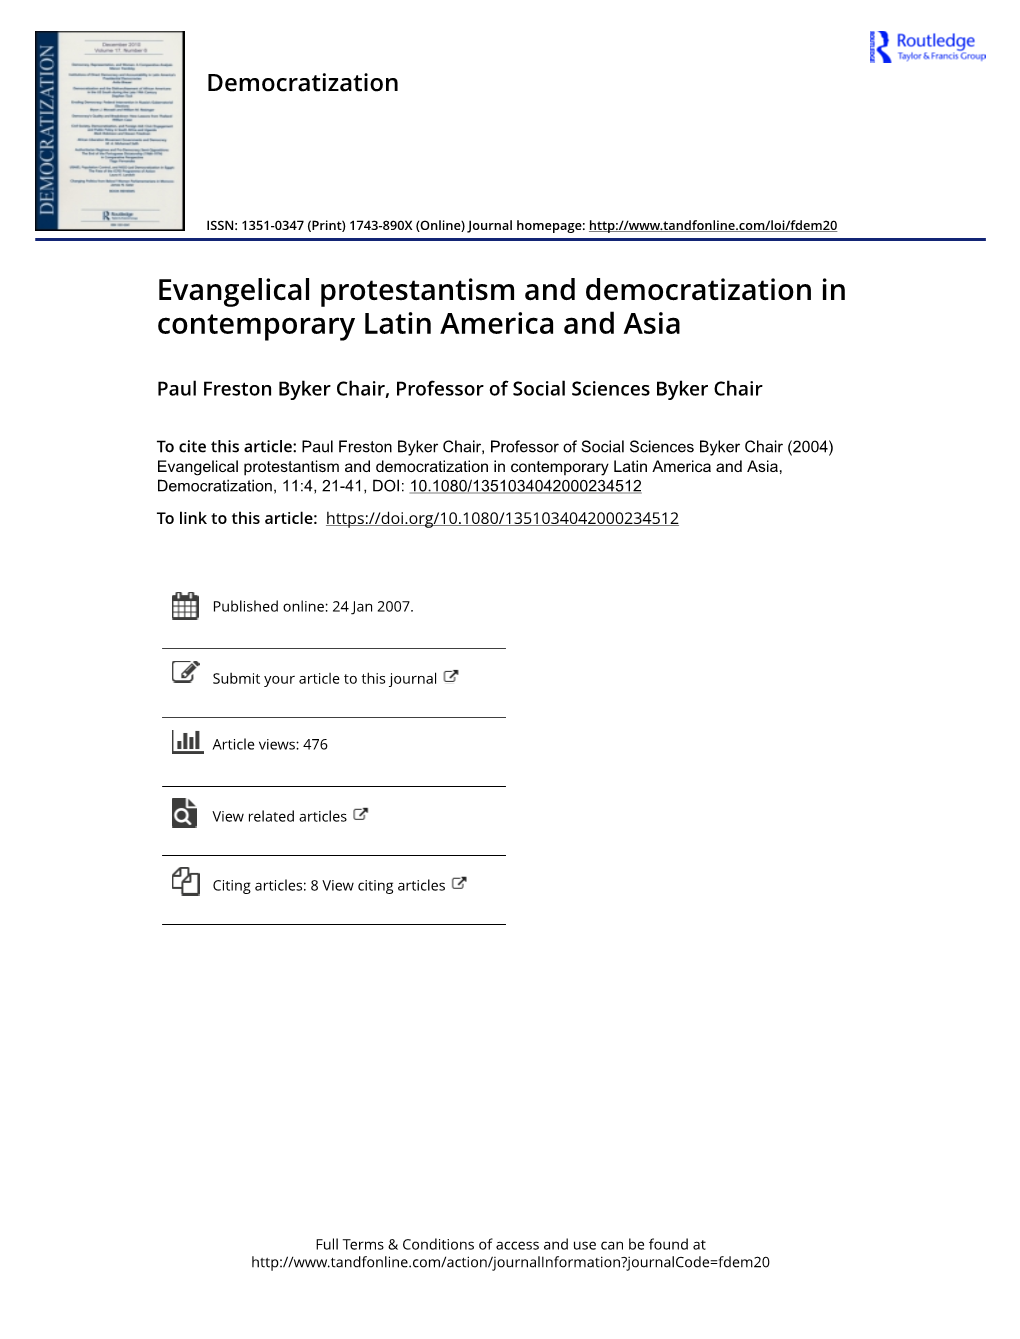 Evangelical Protestantism and Democratization in Contemporary Latin America and Asia